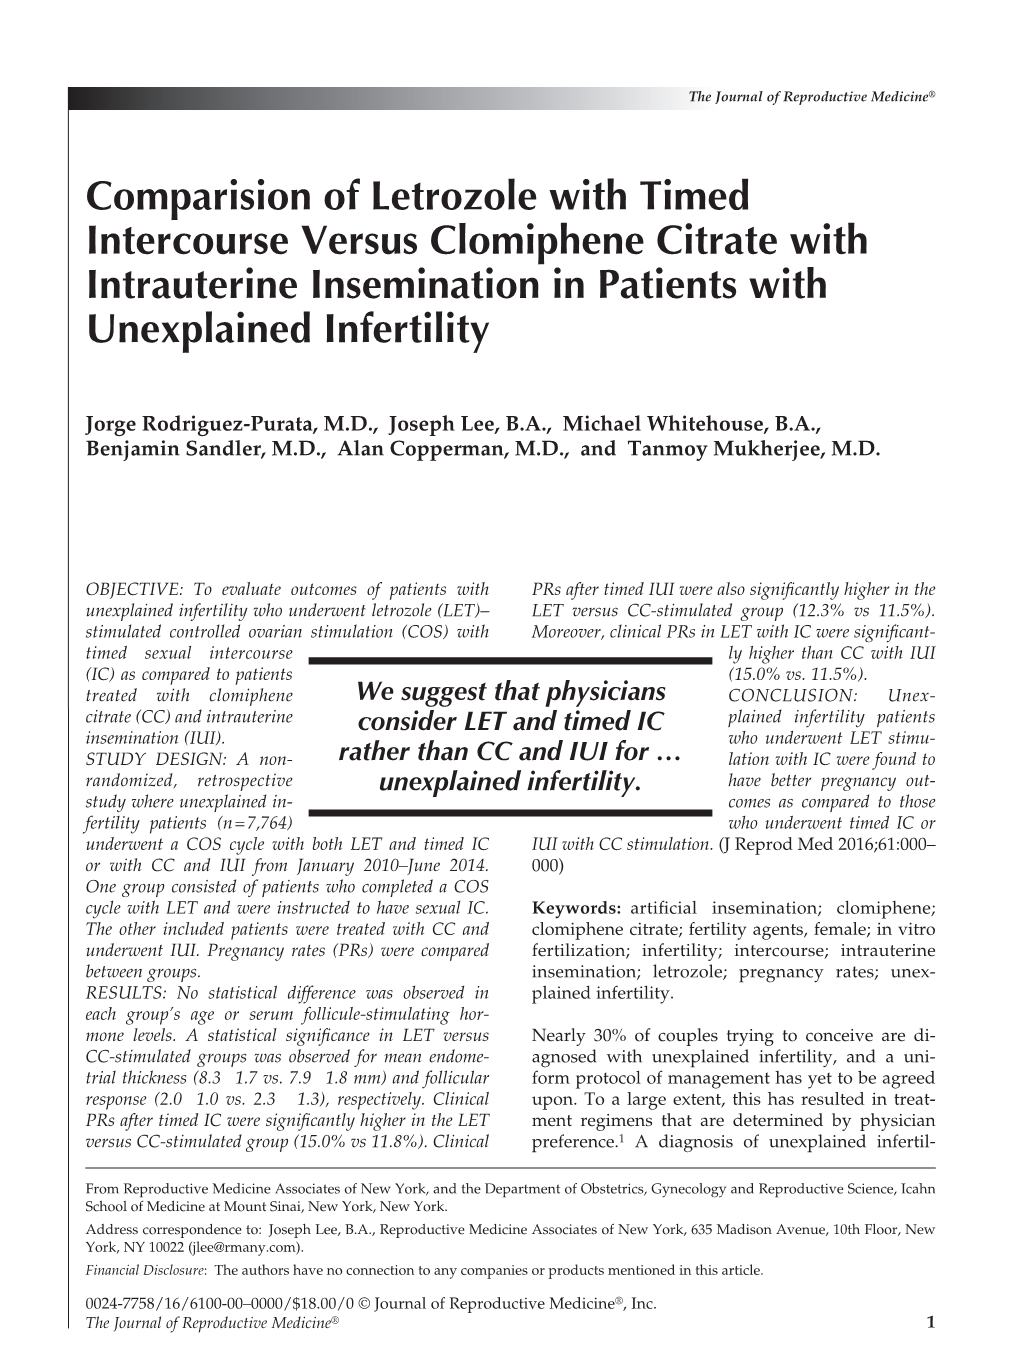 Comparison of Letrozole with Timed Intercourse Versus Clomiphene Citrate with Intrauterine Insemination in Patients with Unexplained